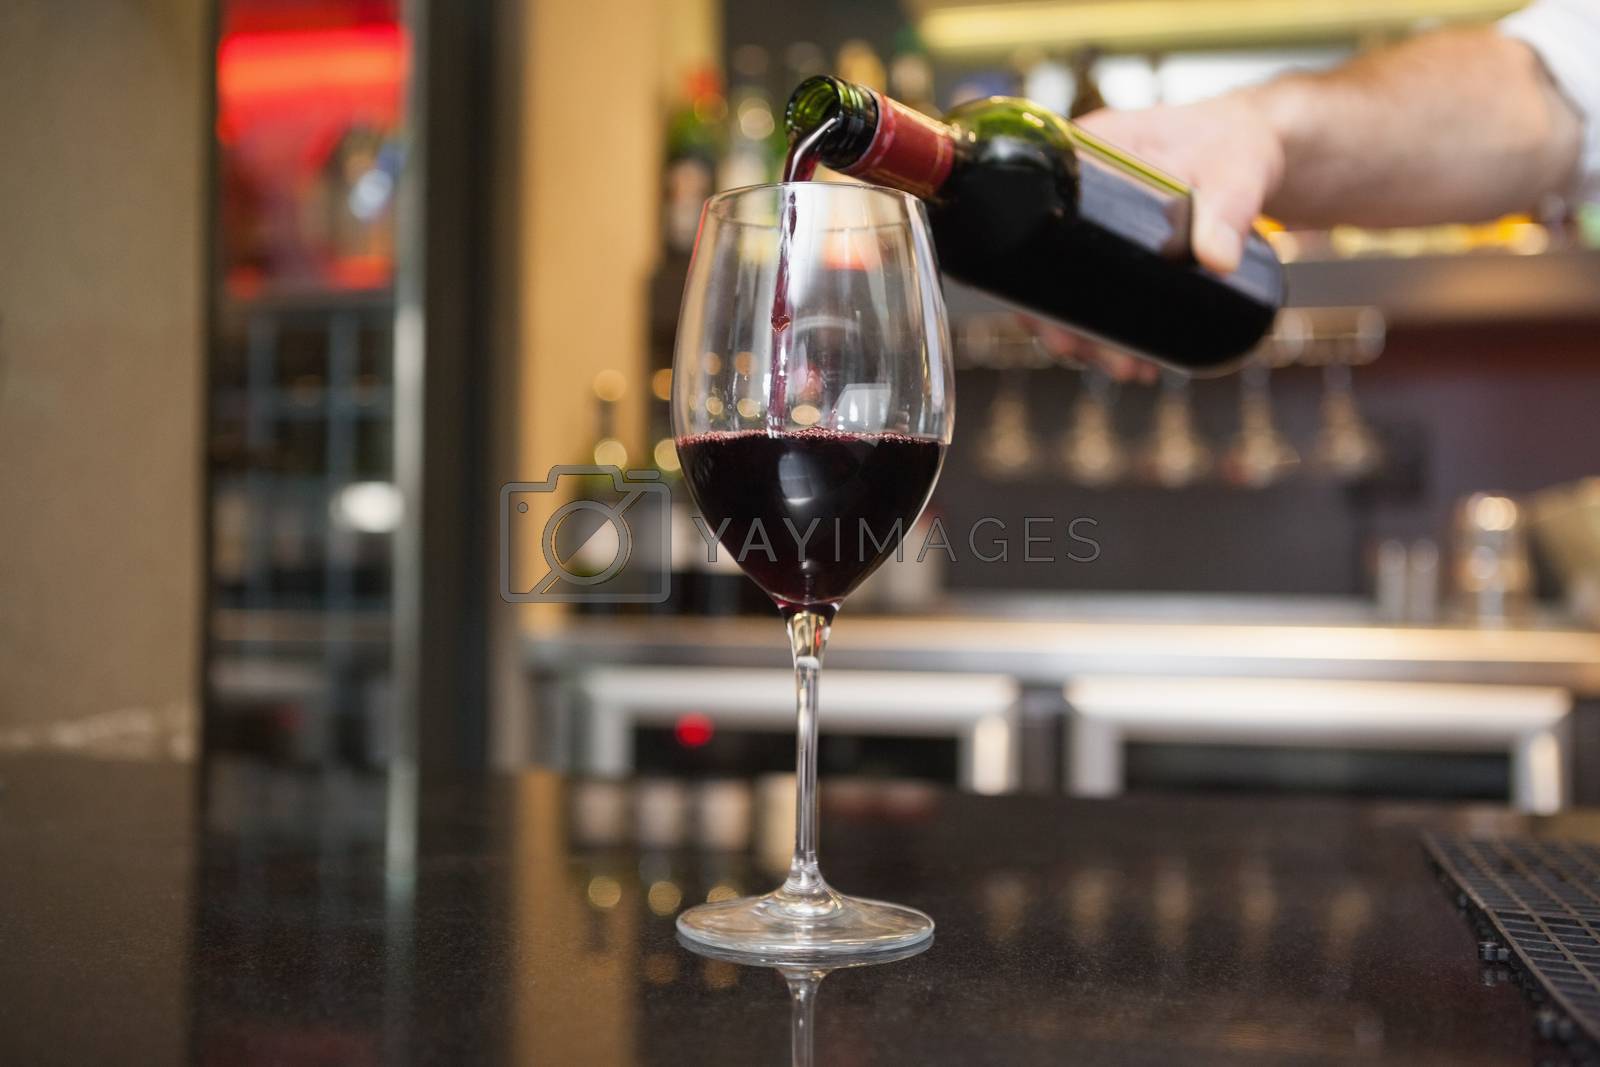 Royalty free image of Hand pouring red wine into glass by Wavebreakmedia